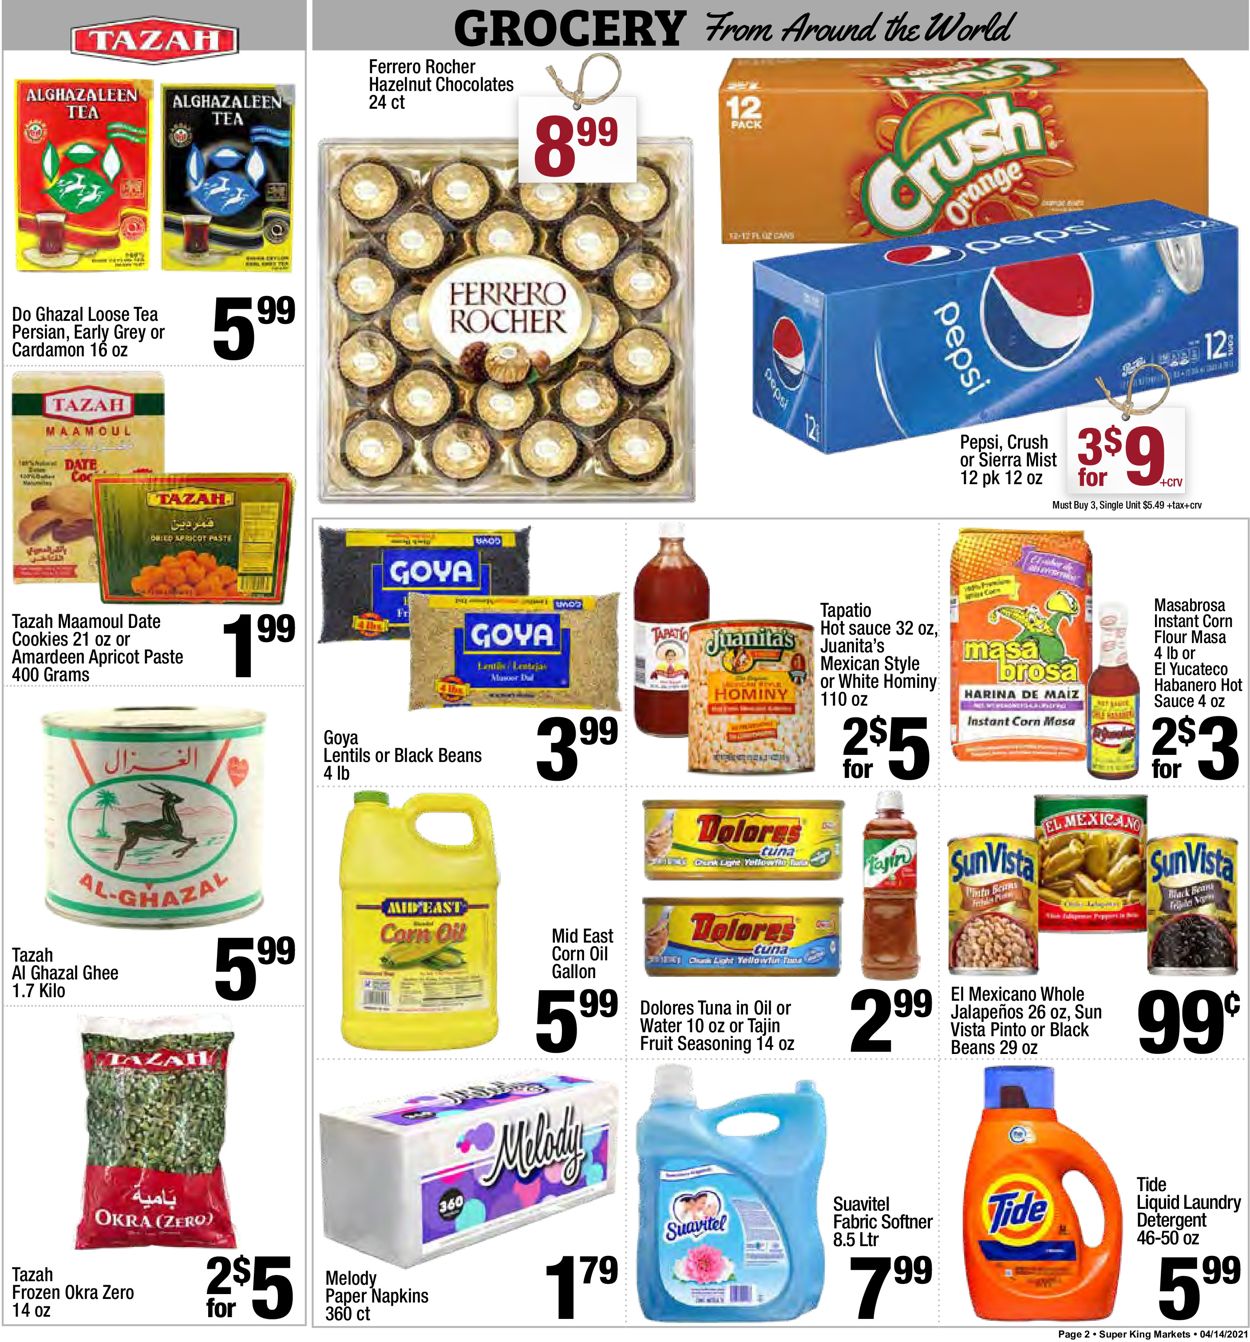 Catalogue Super King Market from 04/14/2021